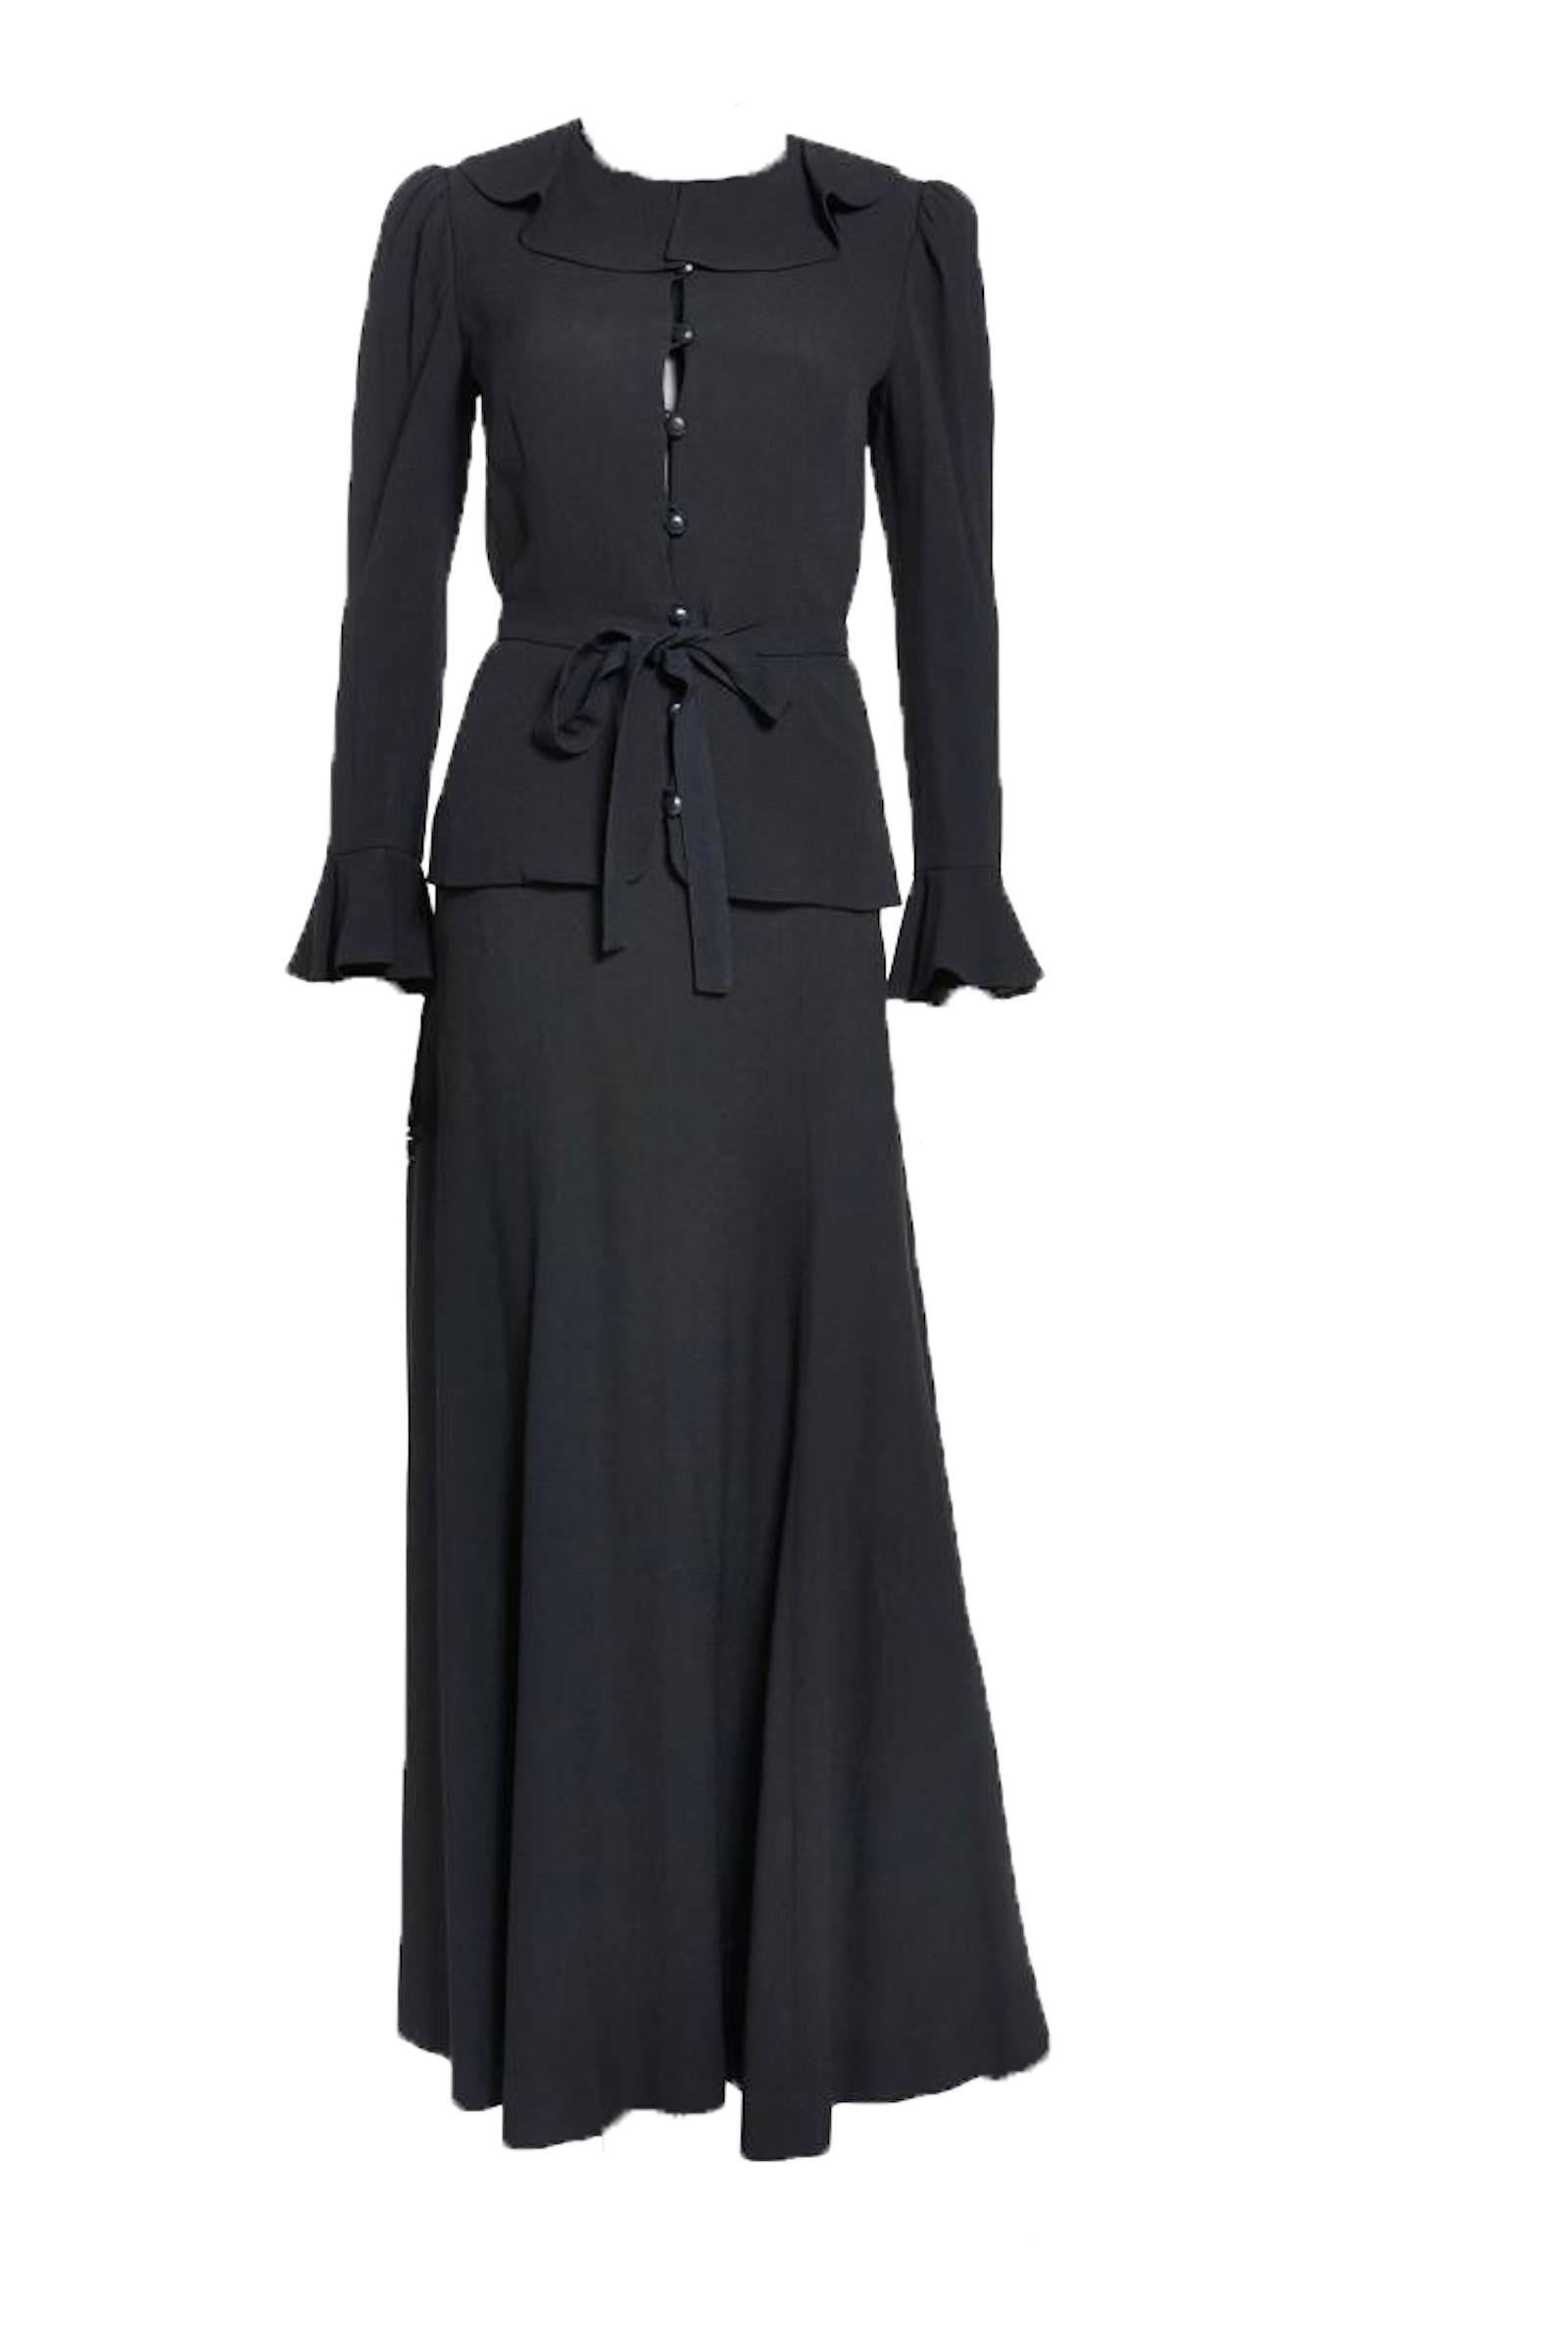 S/S 1974 Yves Saint Laurent black crepe 2-piece ensemble comprised of a ruffled trim front button closure blouse w/detachable belt and matching maxi-skirt. Attached is original editorial from 1974. In excellent condition. Both top and skirt are a FR